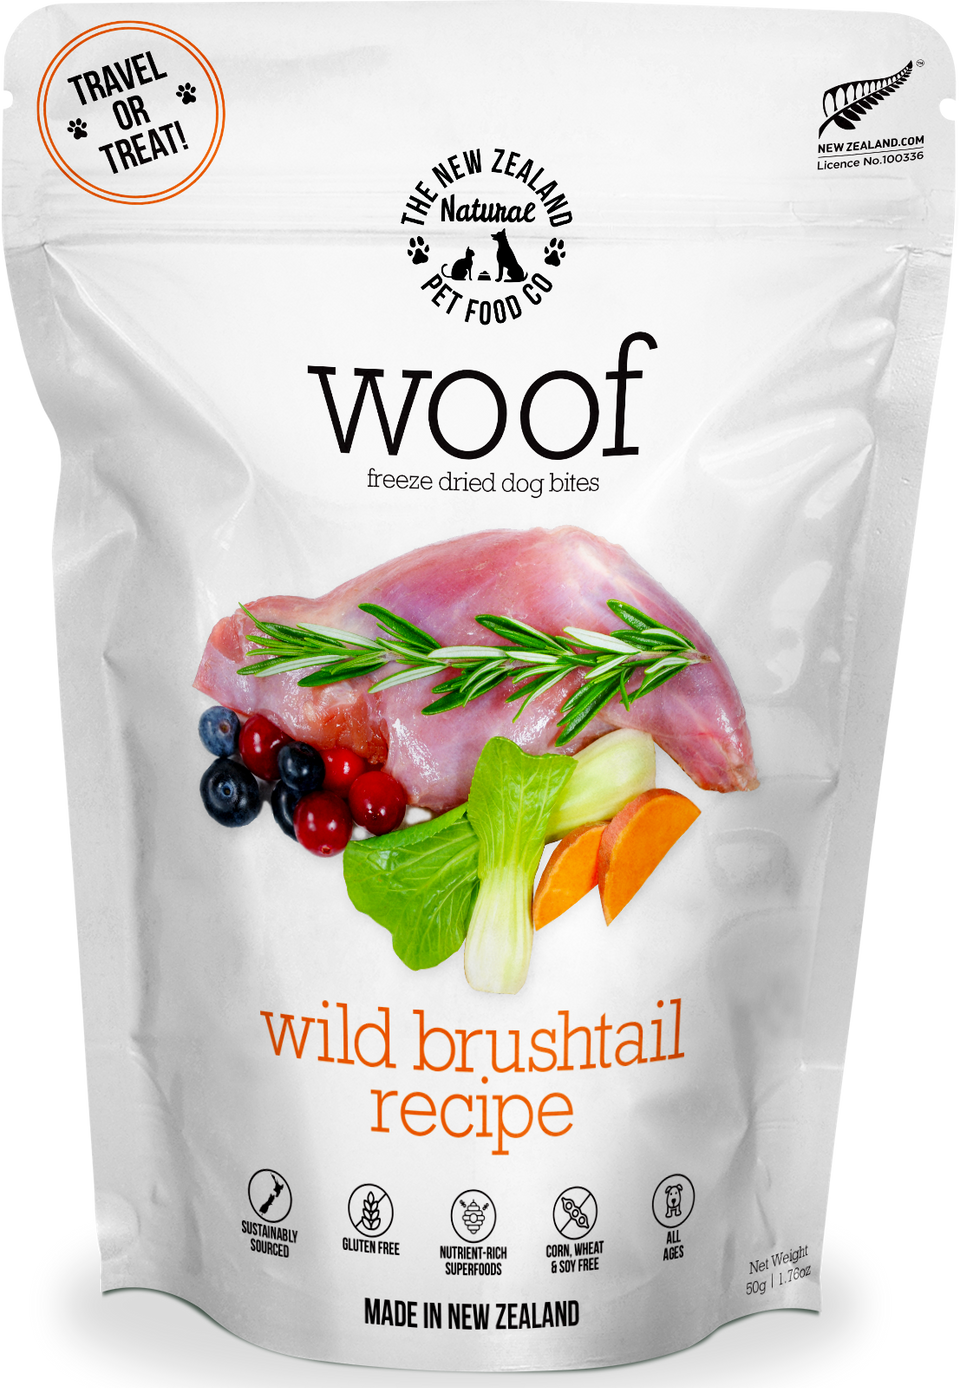 Your Whole Dog: Wild Brushtail Freeze Dried Food.